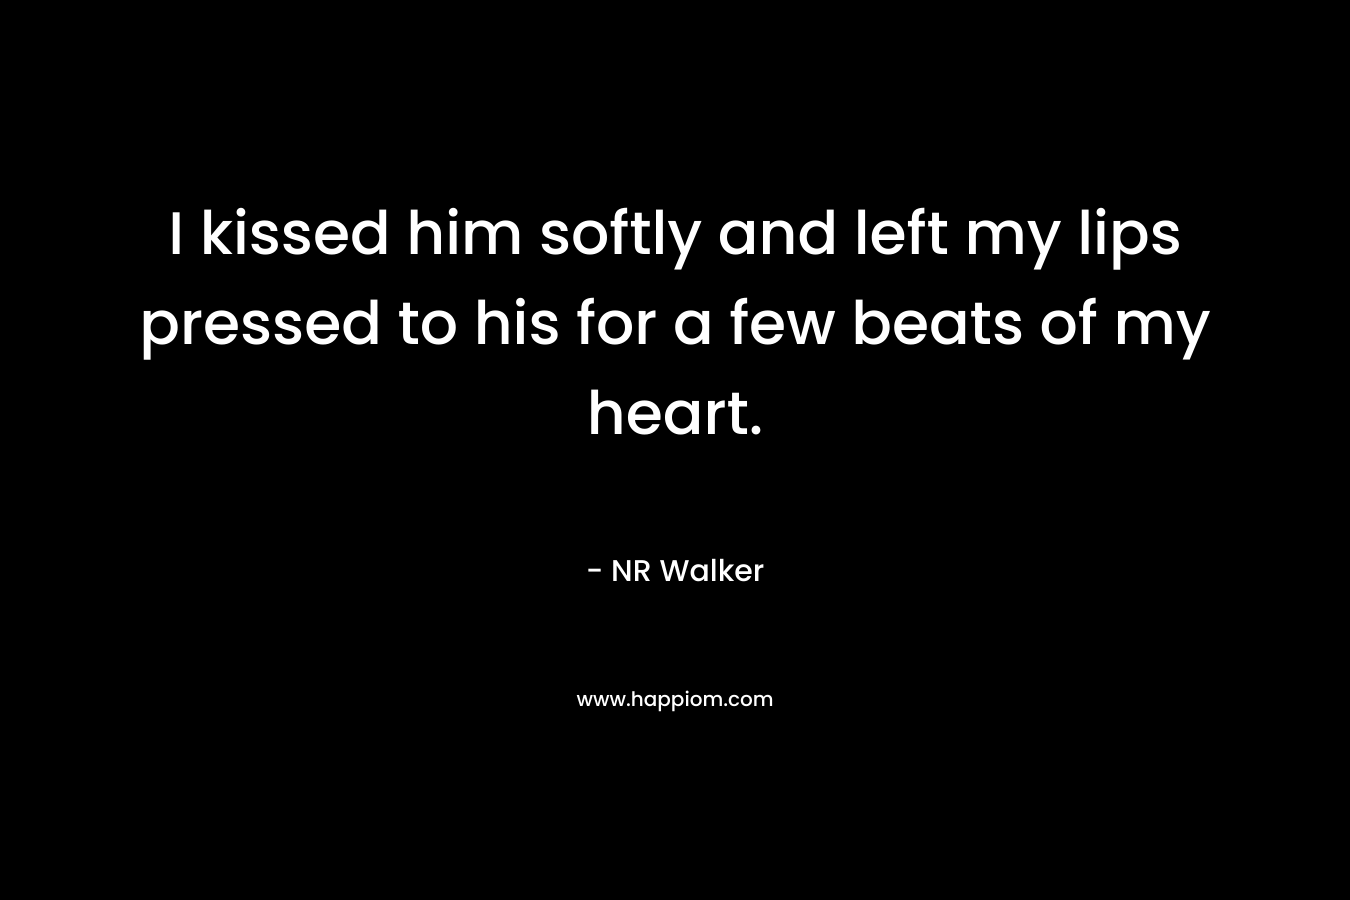 I kissed him softly and left my lips pressed to his for a few beats of my heart. – NR Walker